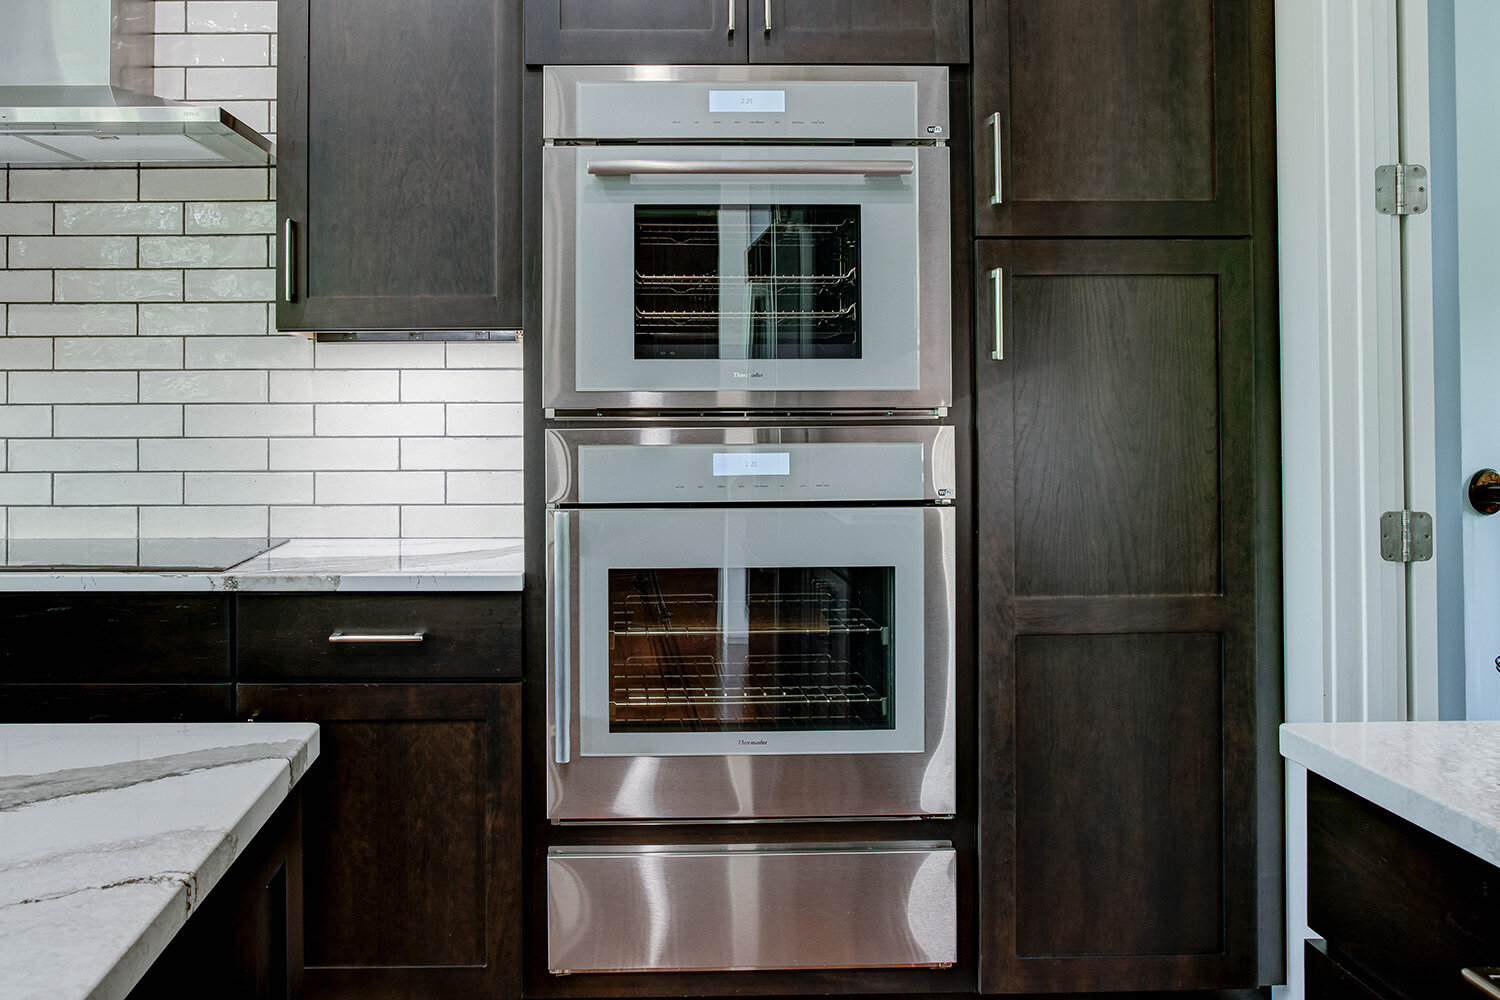 Double ovens add more cooking space